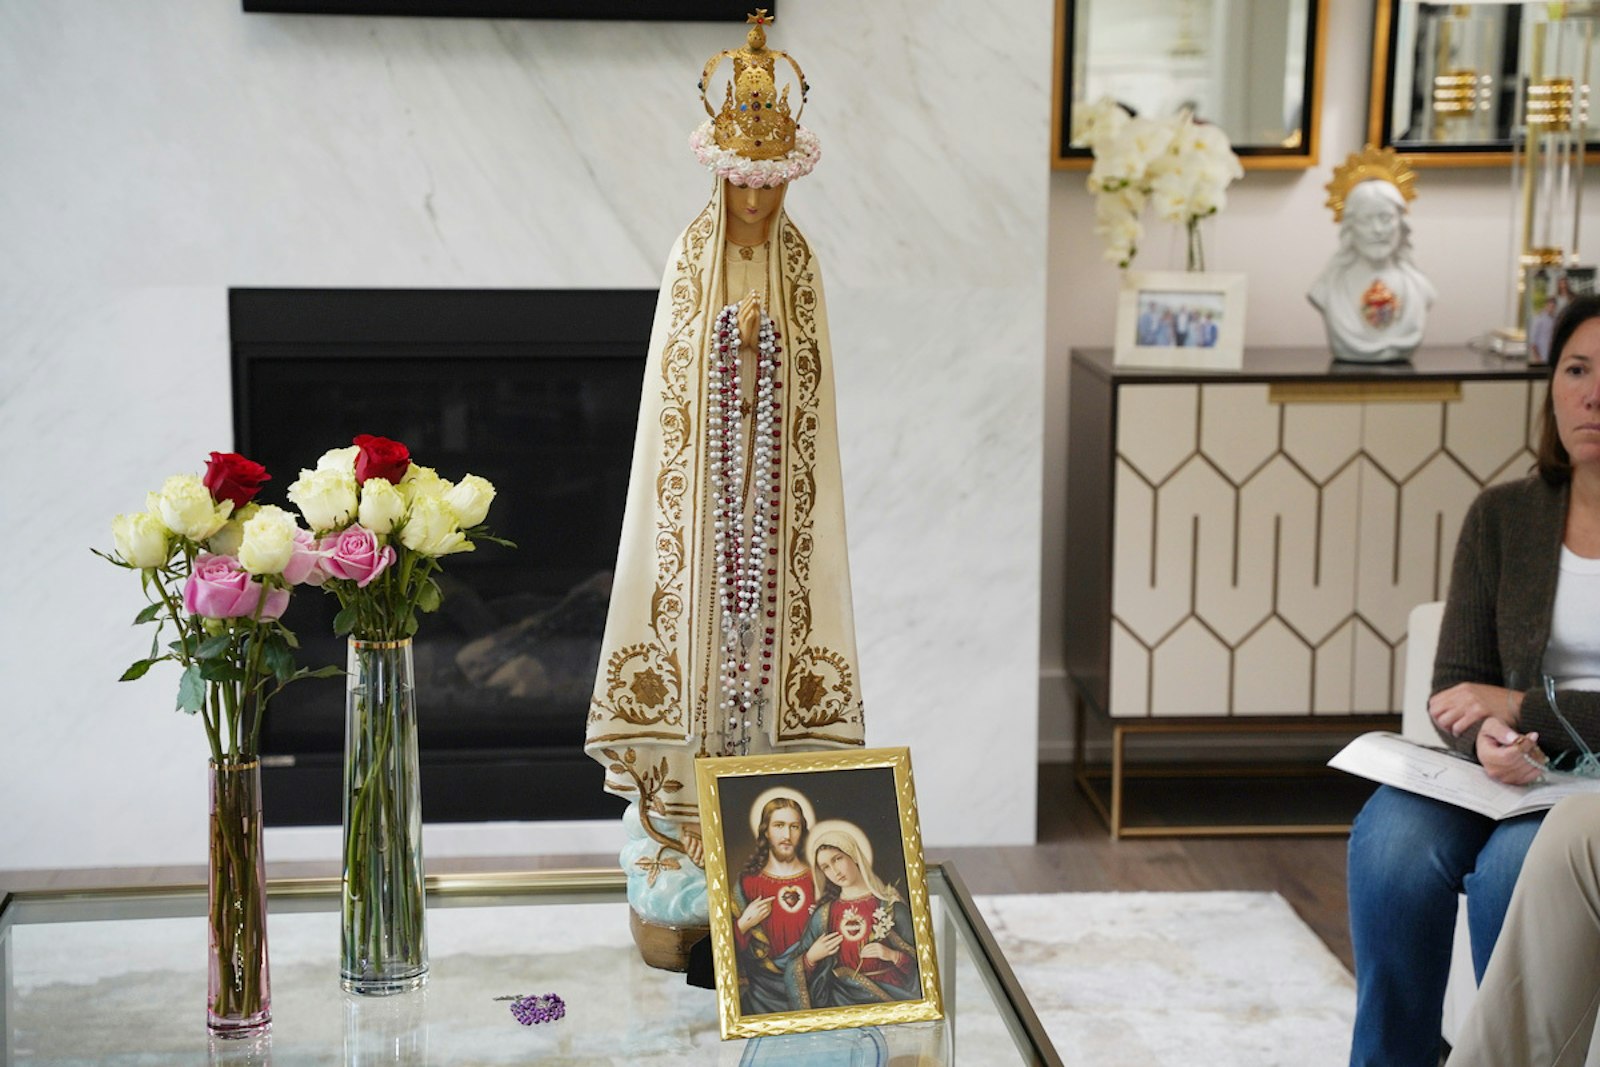 St. Clair Shores businessman John LoVasco, who founded the Detroit chapter of the Men of the Sacred Hearts in 1964, was tasked by a Montreal priest, Fr. Francis Larkin, to find a statue of Our Lady of Fatima to stay in a family's home whenever a home was enthroned.